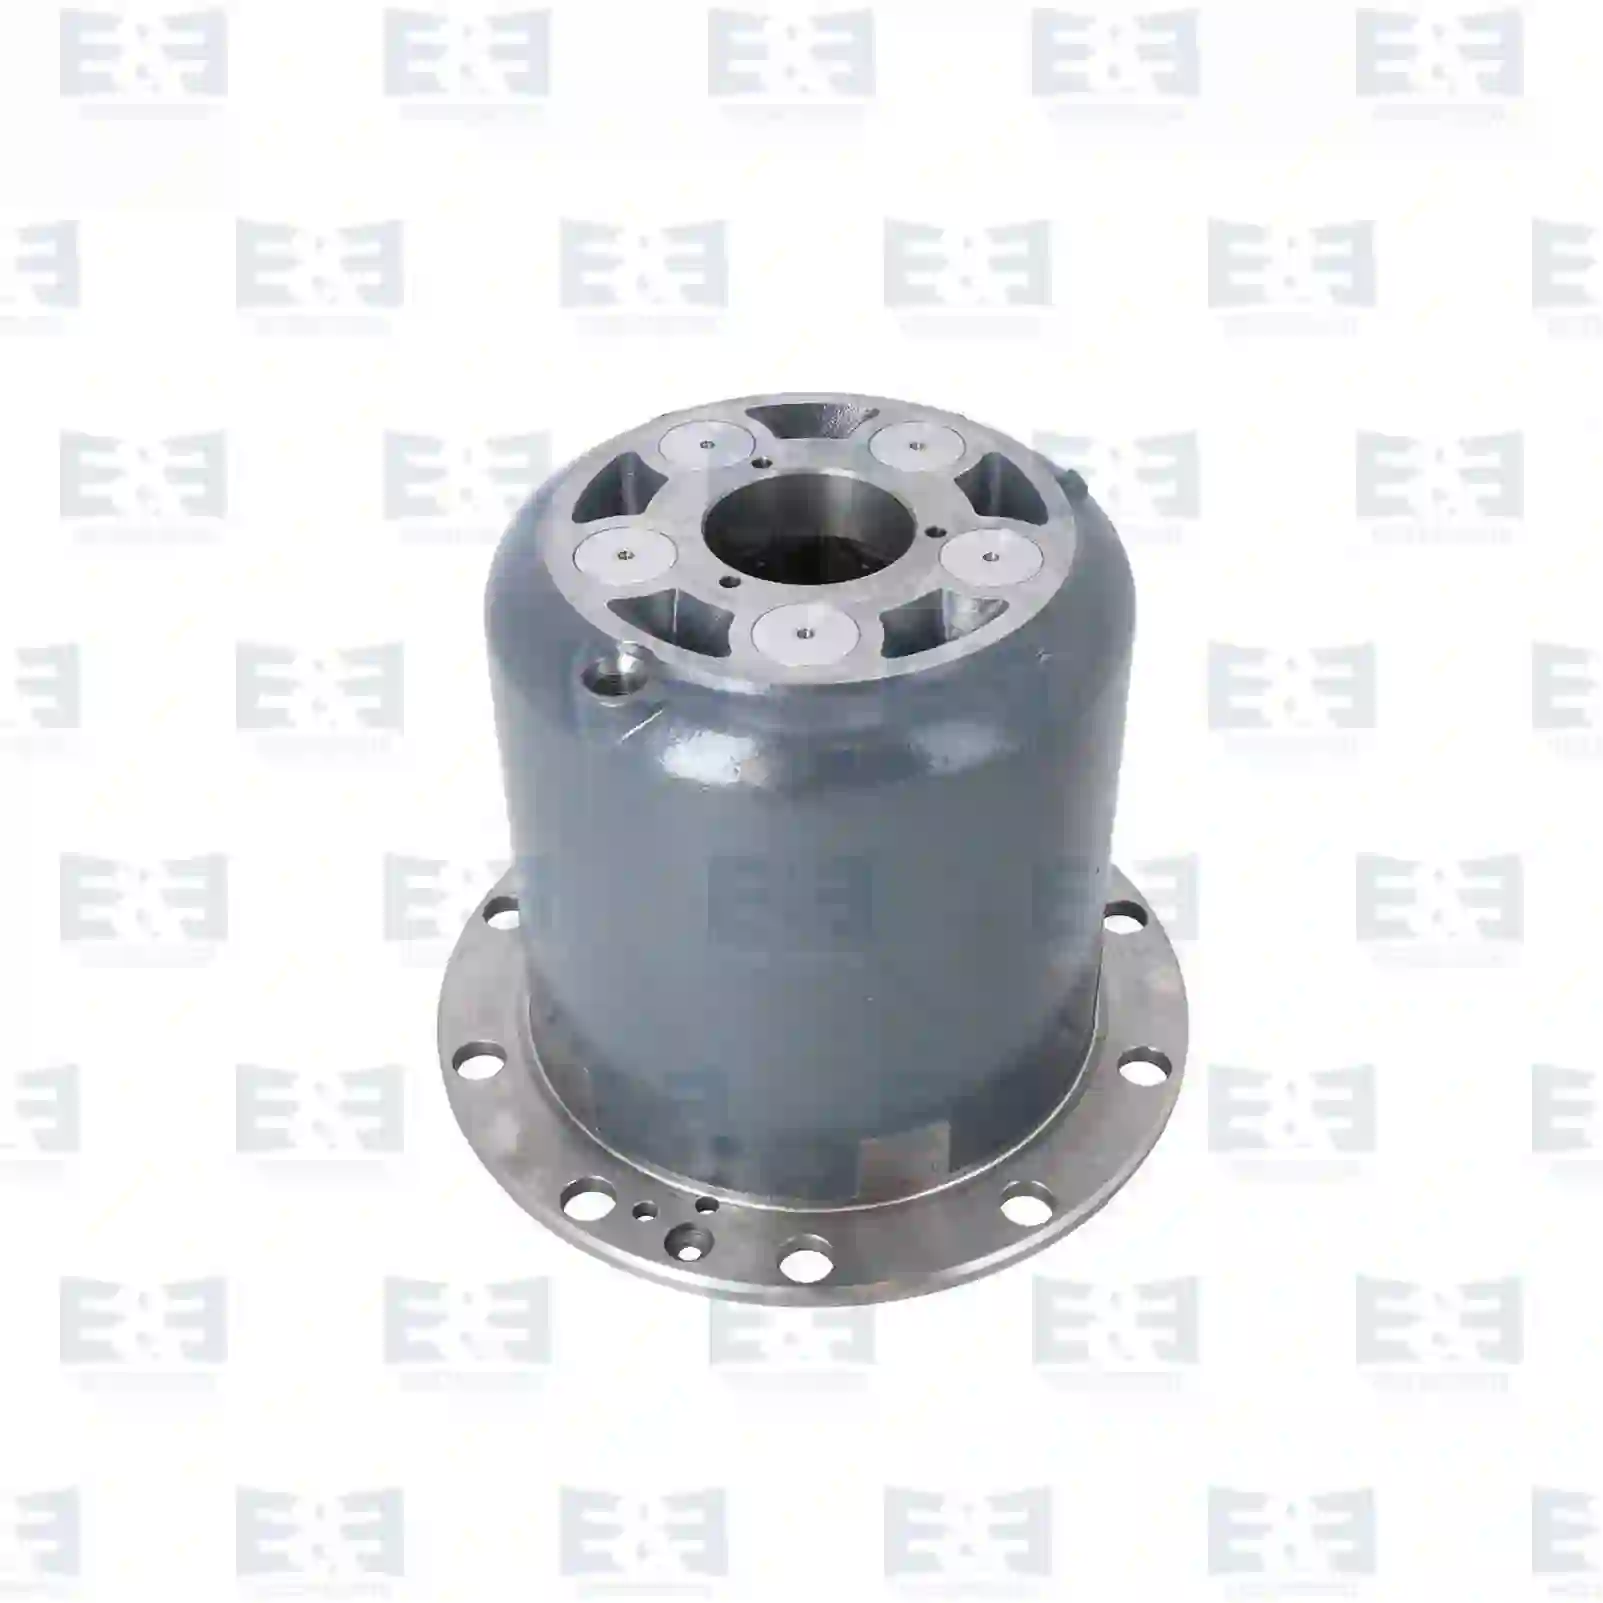  Bell hub, complete || E&E Truck Spare Parts | Truck Spare Parts, Auotomotive Spare Parts